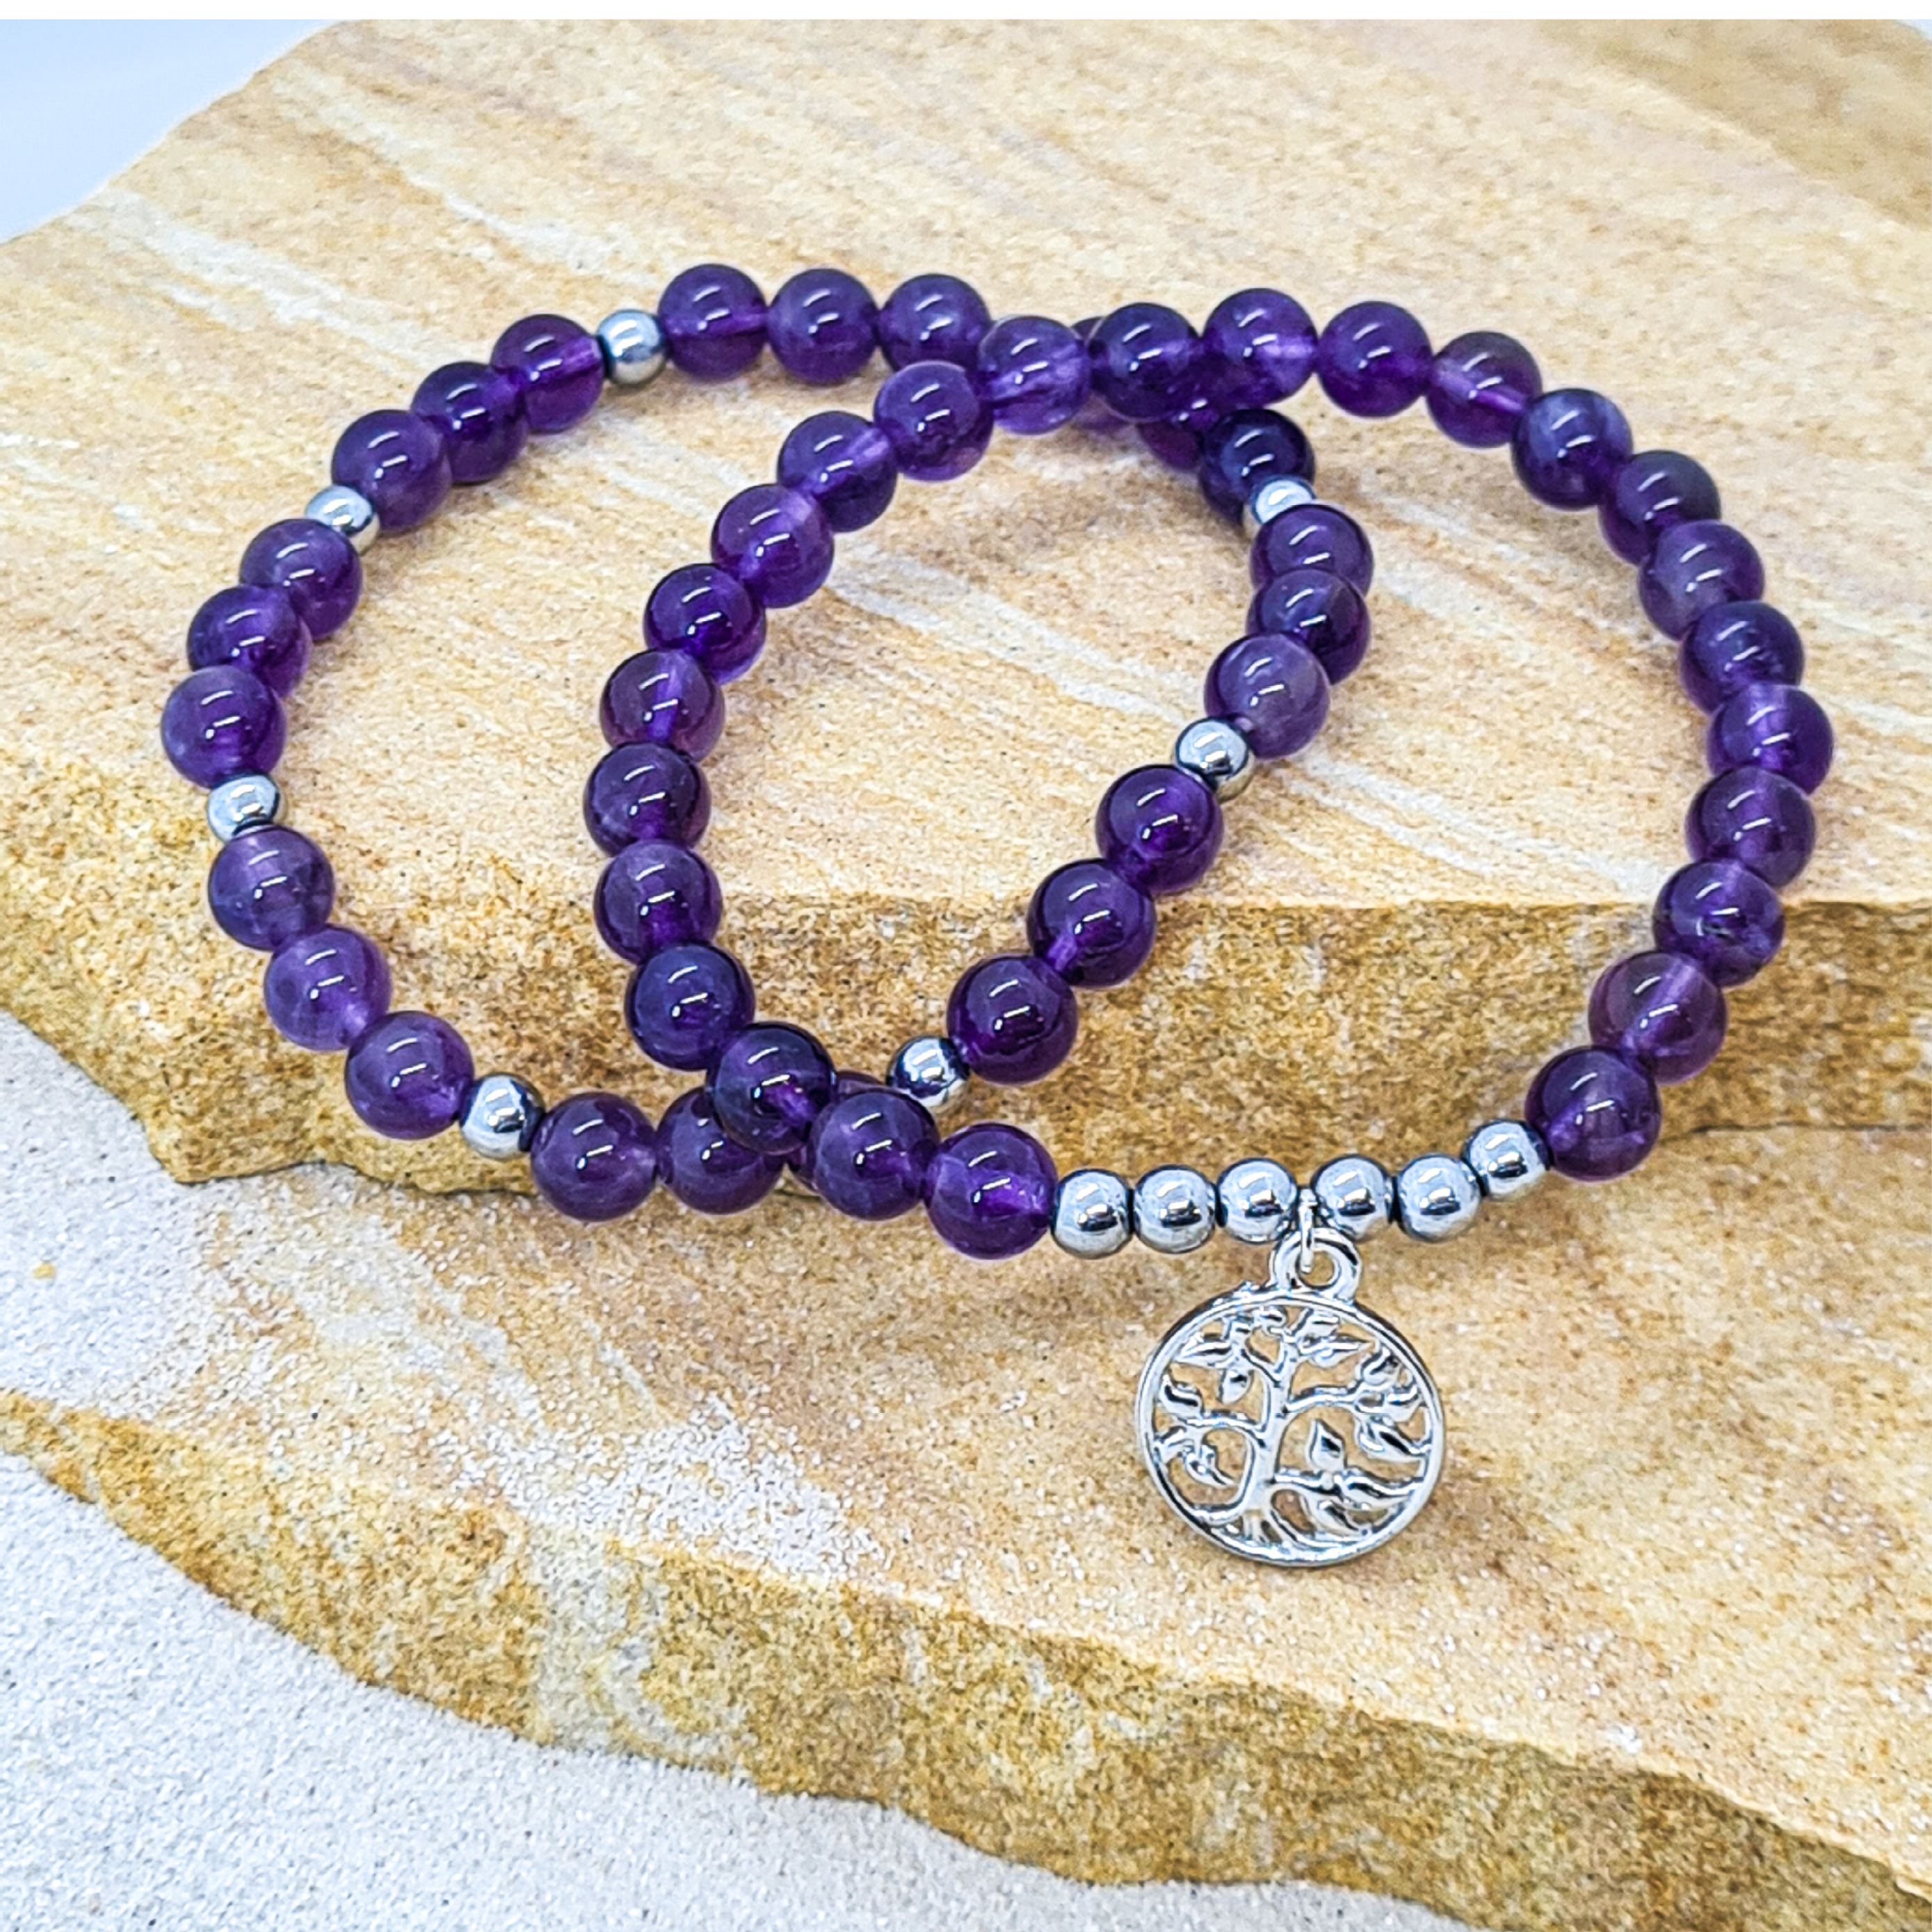 Amethyst 6mm crystal bead bracelet twin set with silver tree of life charm